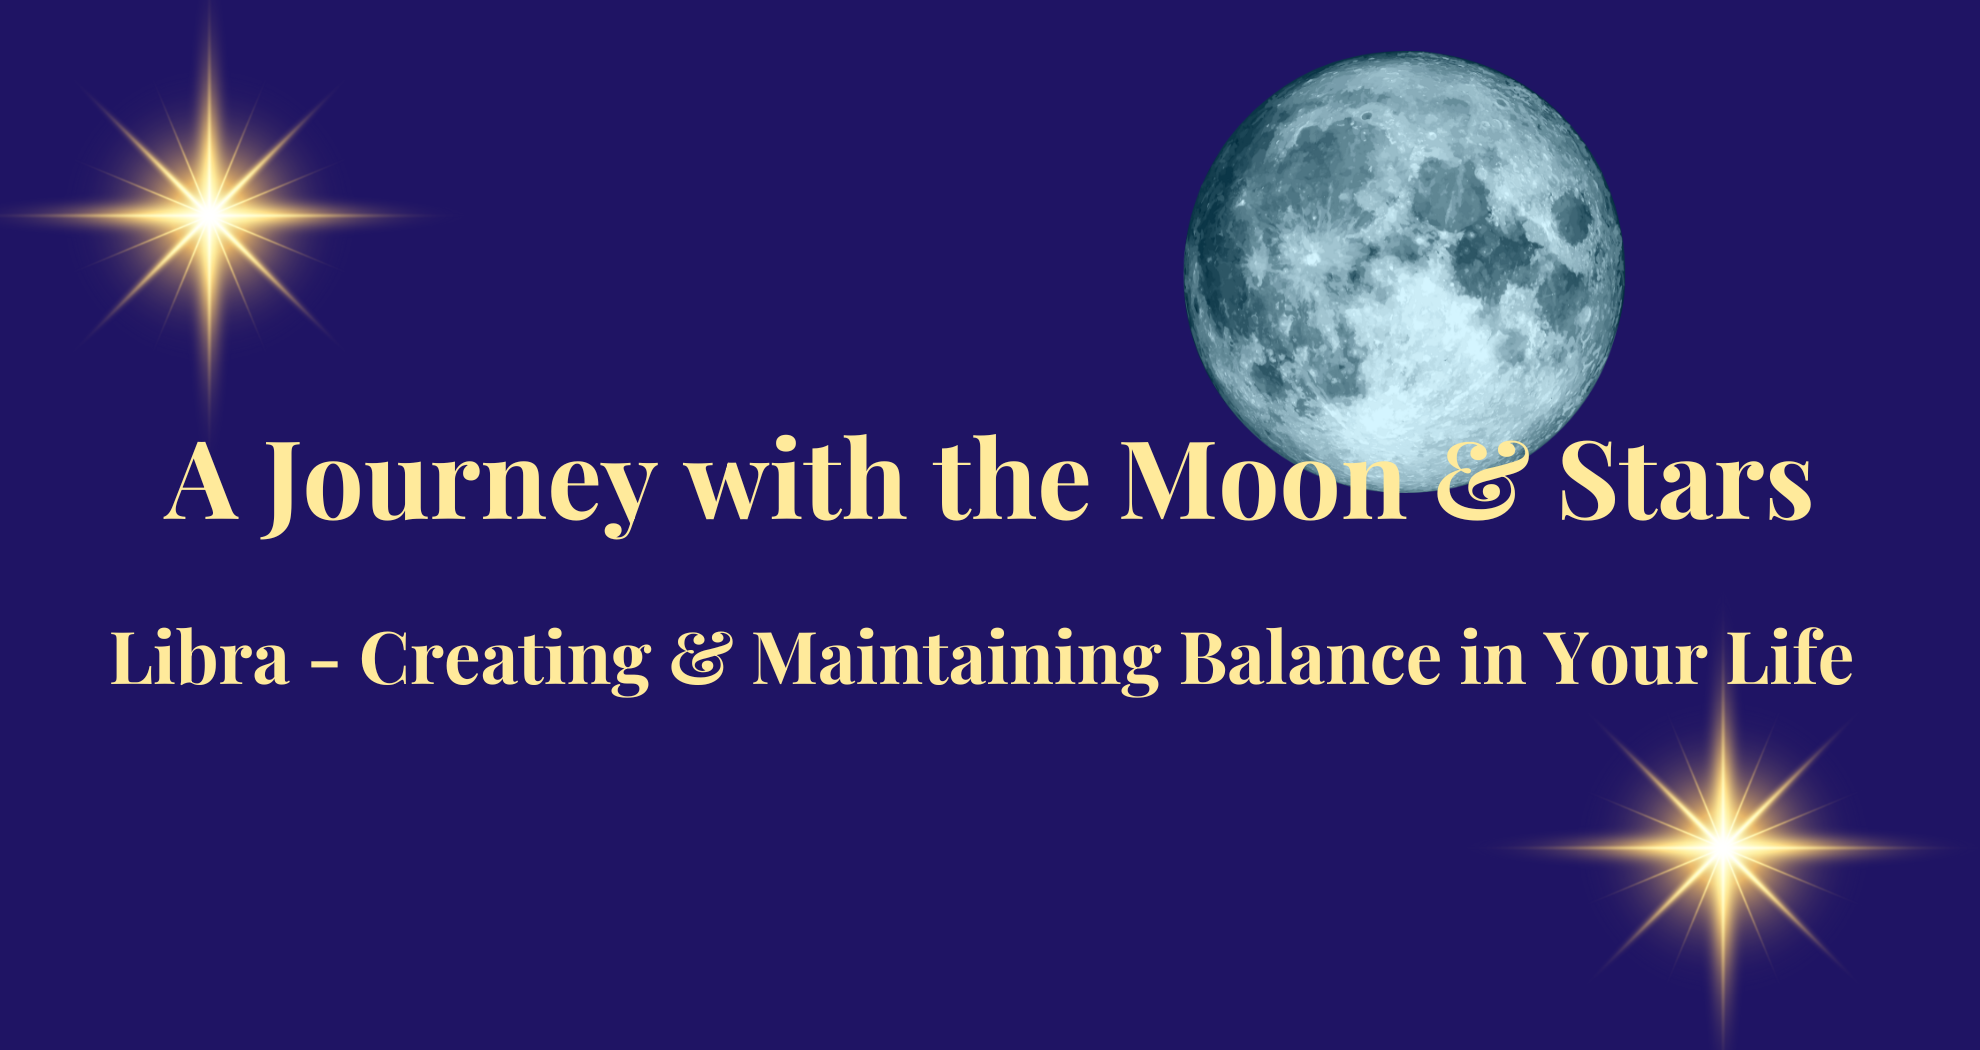 Libra - Creating & Maintaining Balance in Your Life